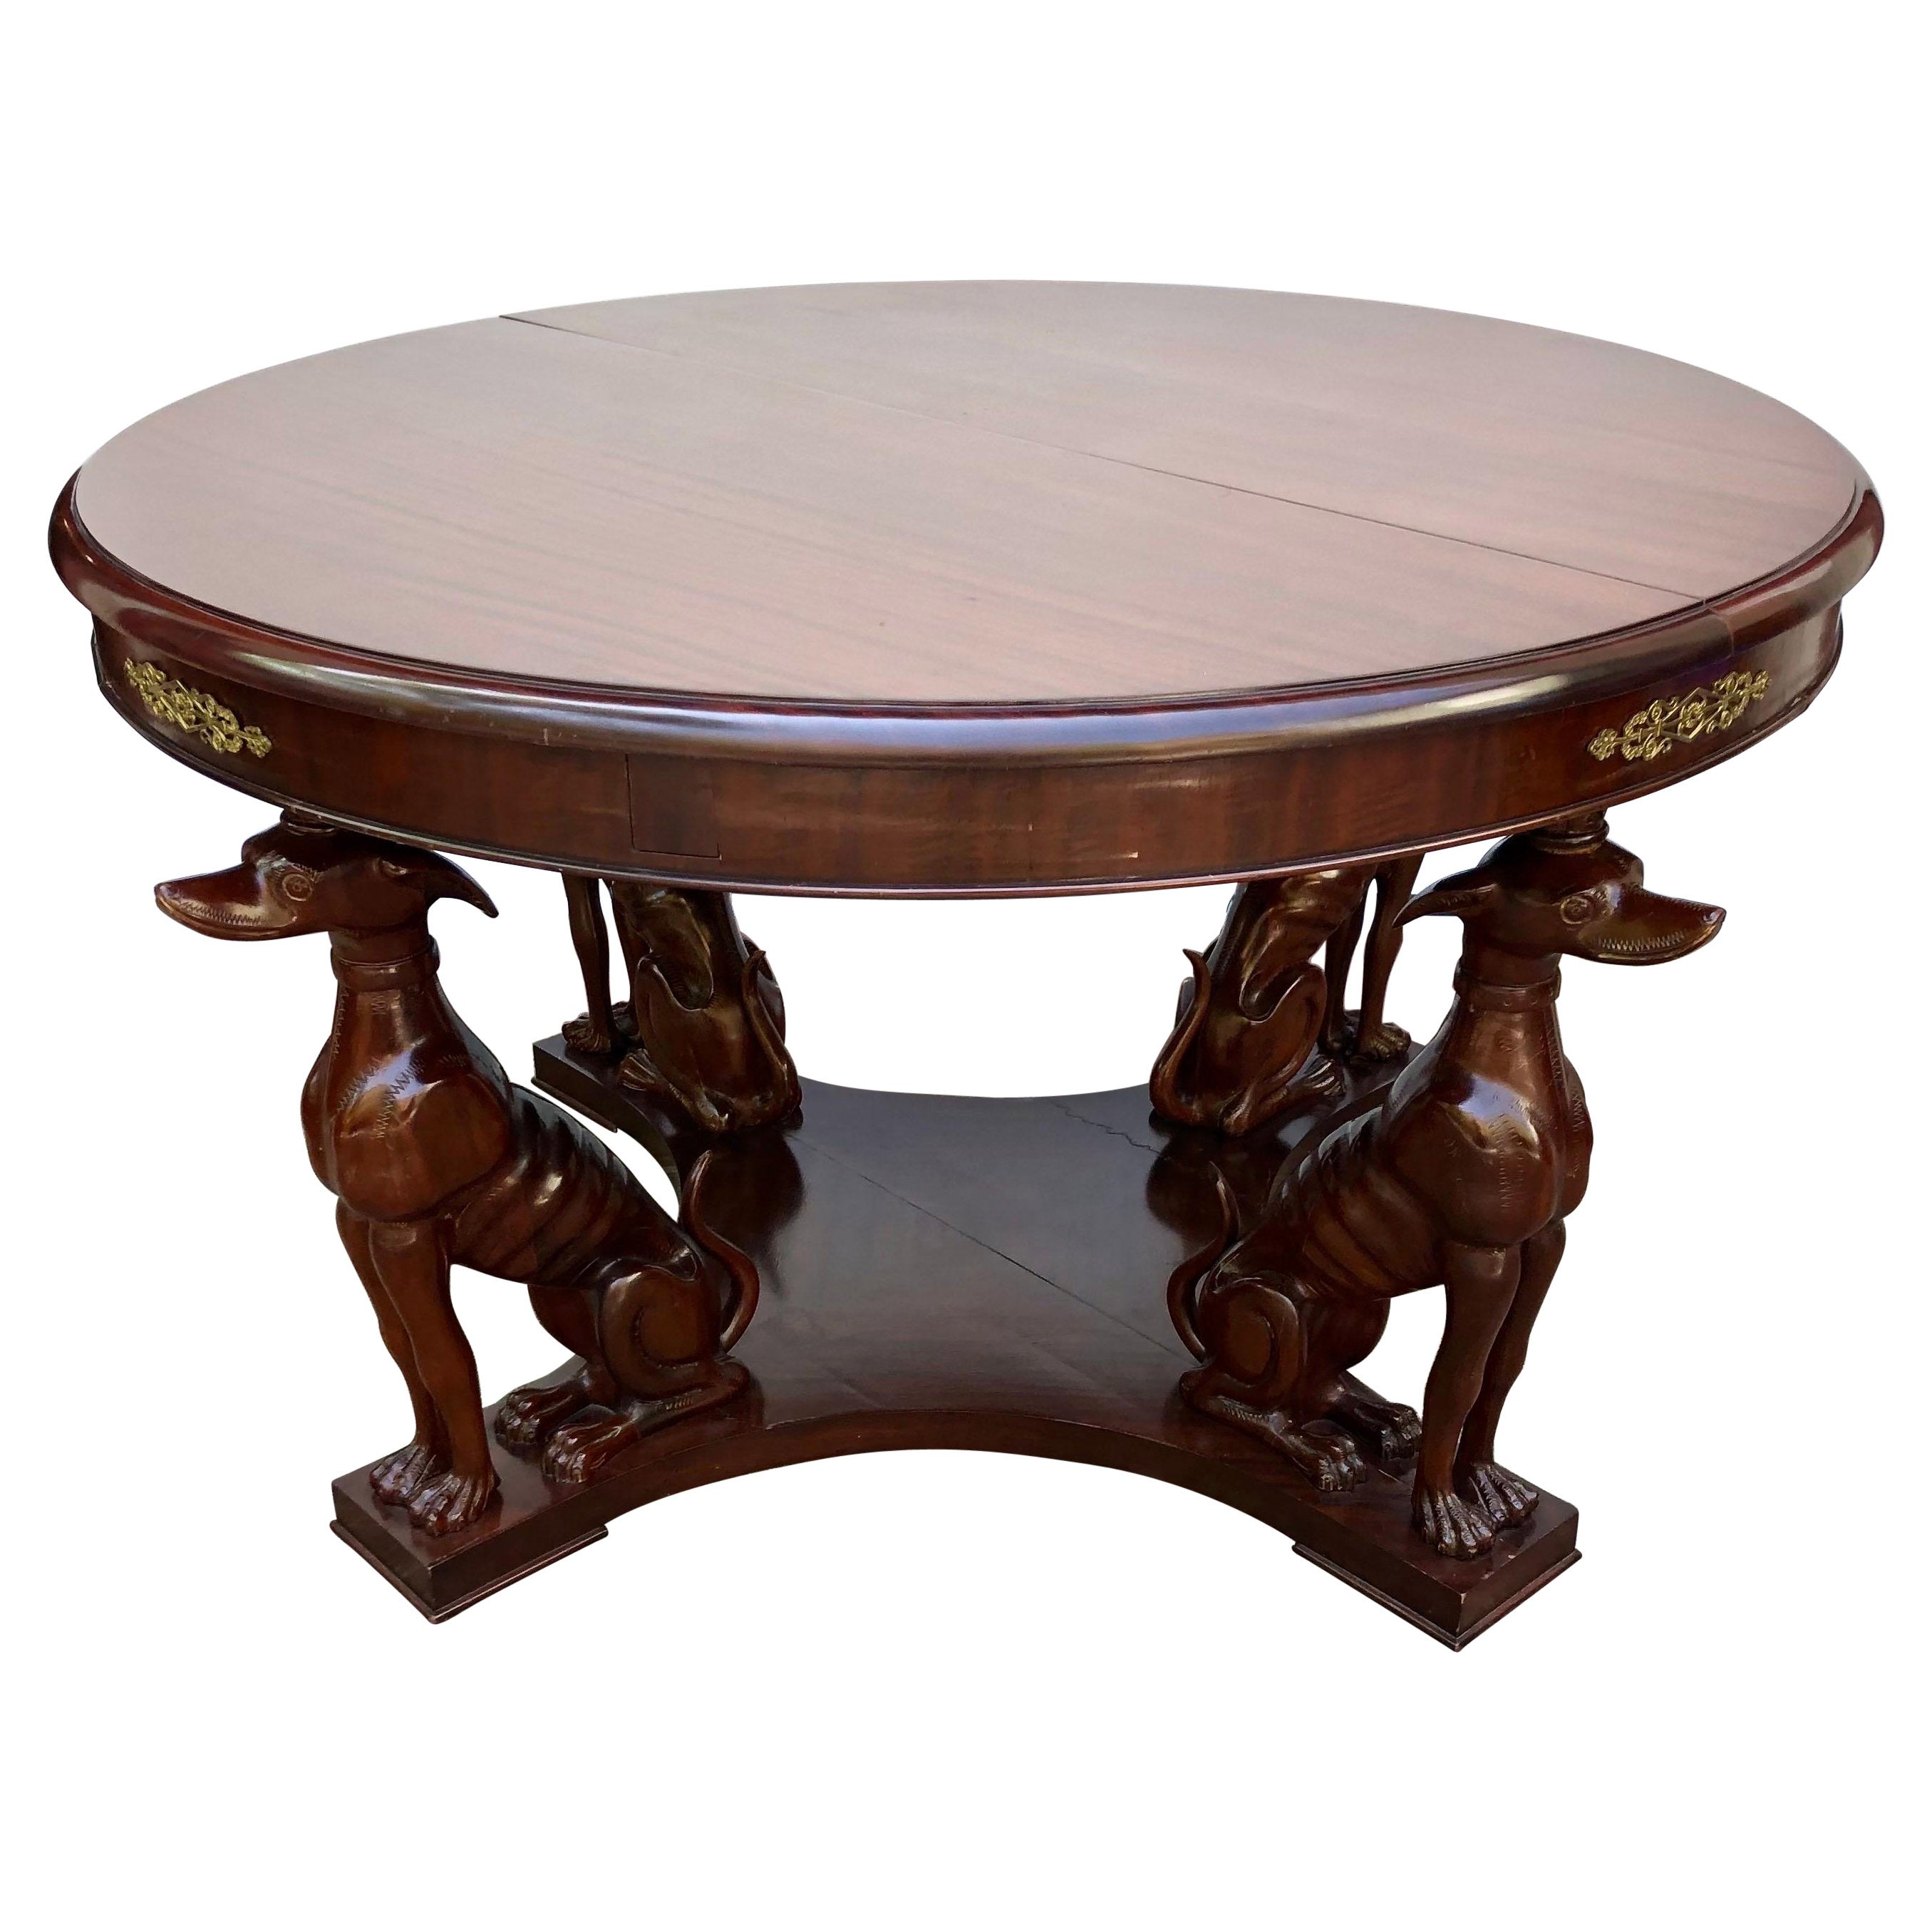 Neapolitan Art Deco Whippet Center/Dining Table with Bronze Mounts, Early 20th C For Sale